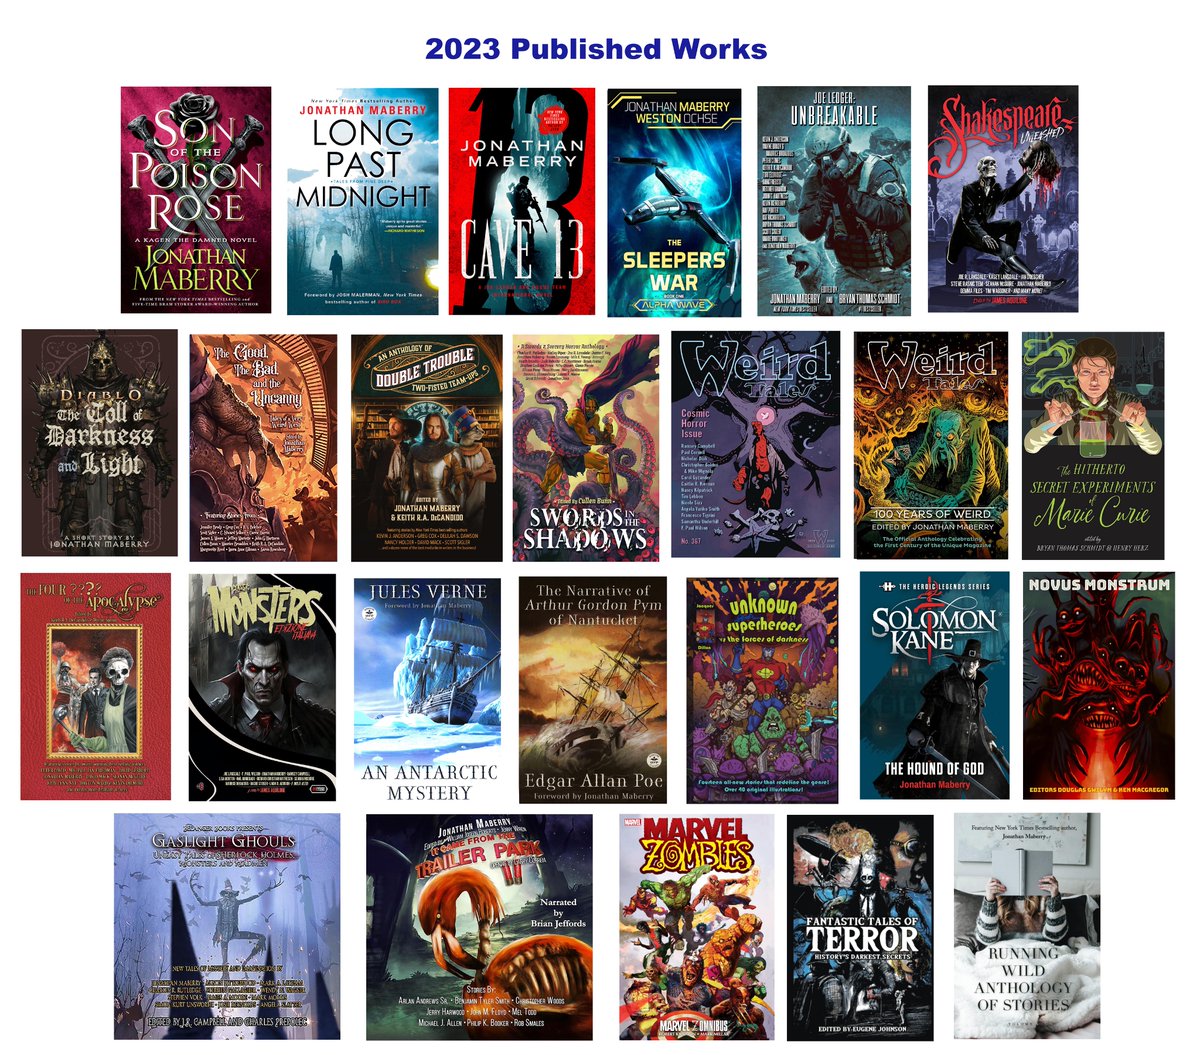 As seems to be a trend this week, I'm joining the club by posting the covers of all of my 2023 book releases. Novels, short story collections, anthologies I've edited and anthologies I'm in, comics, and books for which I wrote forewords.